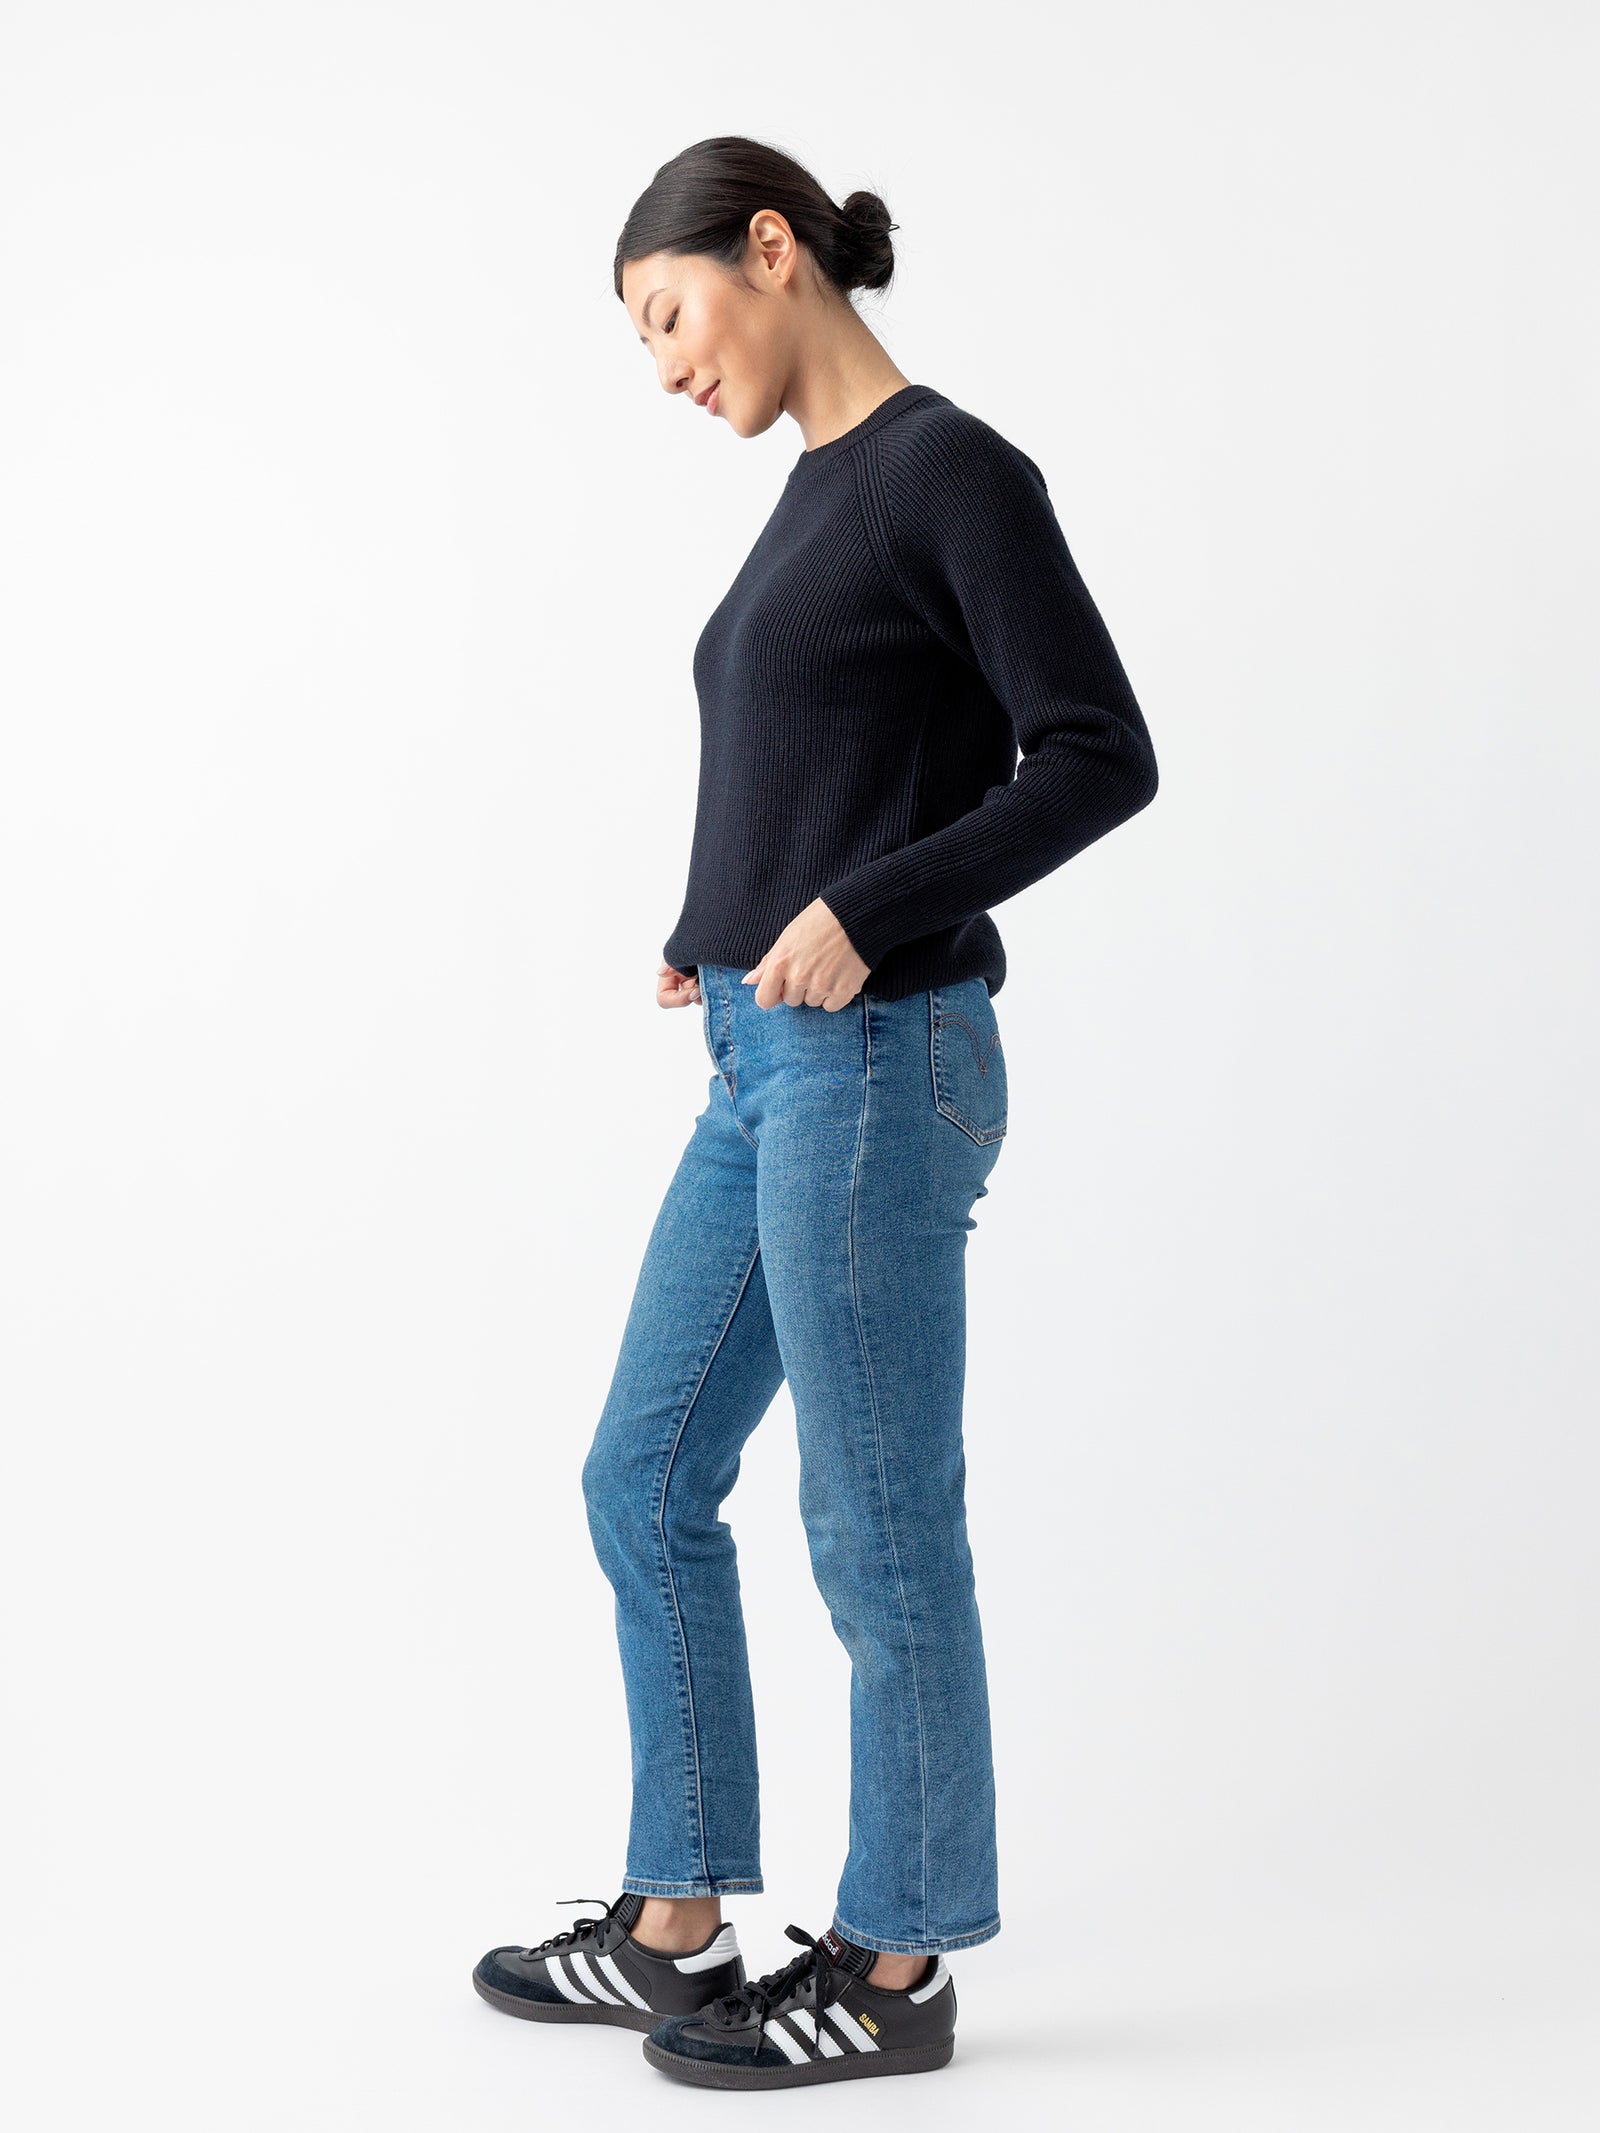 A woman wearing a Cozy Earth Women's Classic Crewneck, blue jeans, and black sneakers with white stripes stands against a plain white background. She is facing slightly to the left with her hands in her pockets and her hair tied back. 